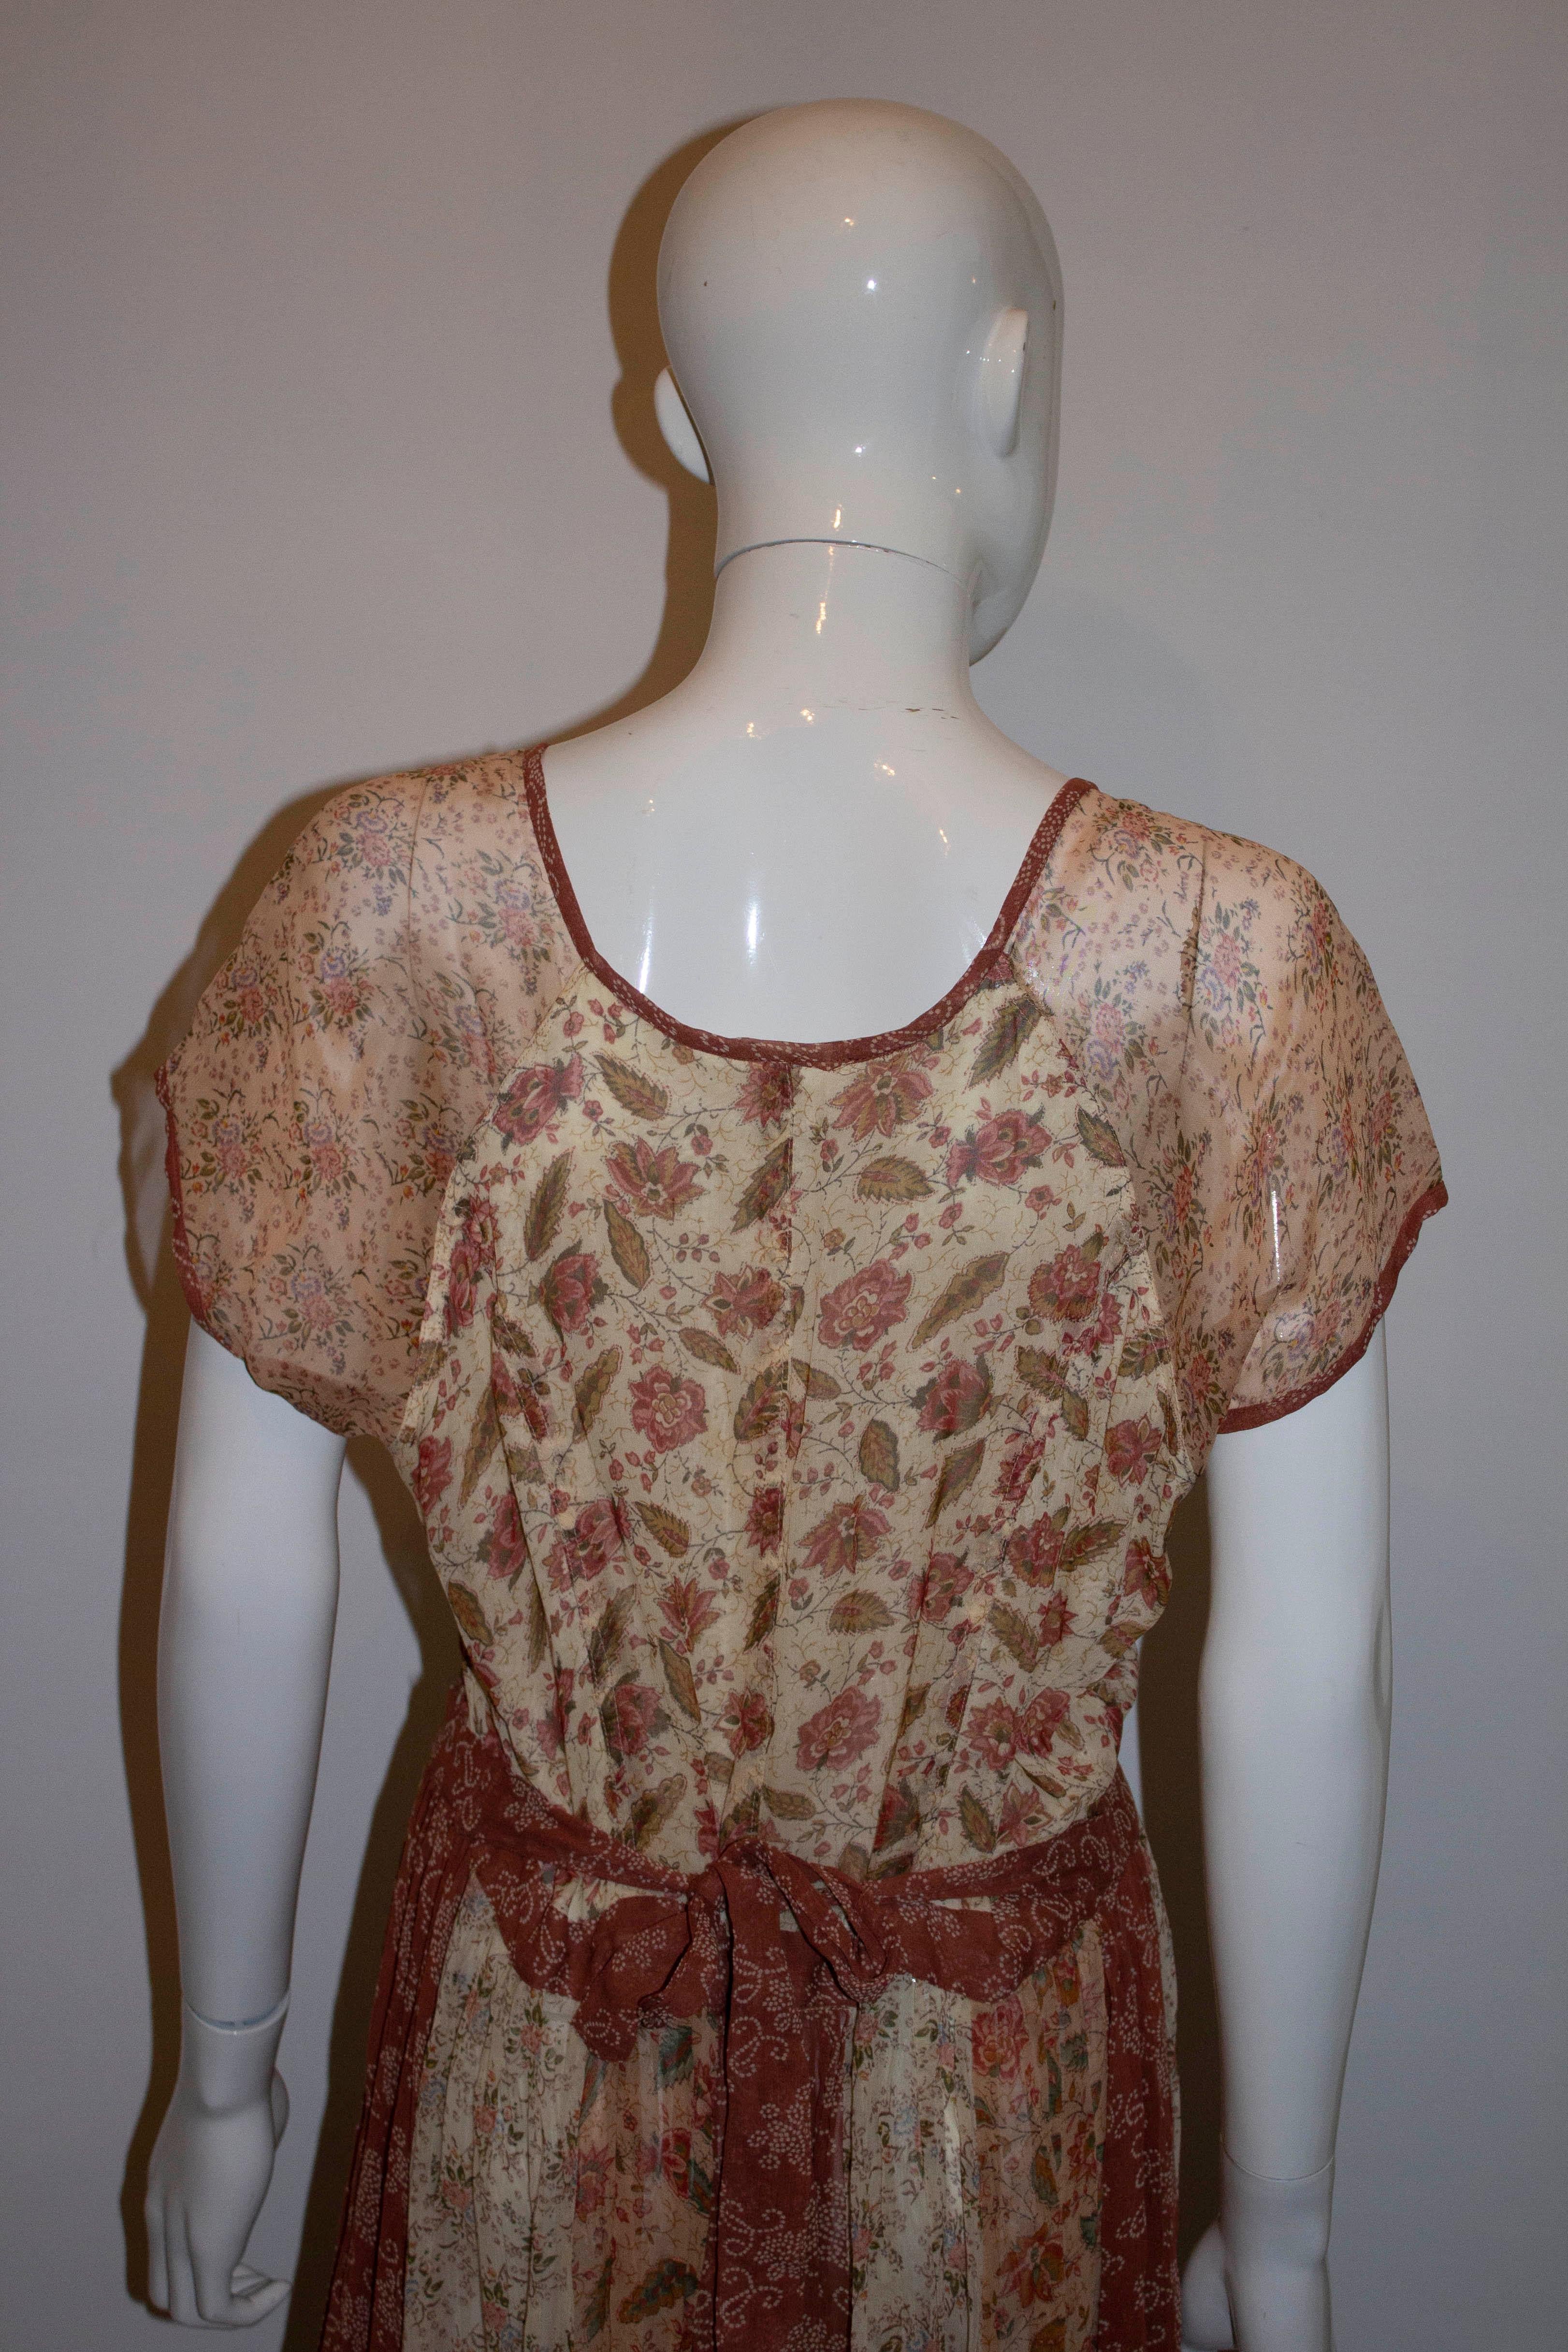 A lovely vintage floral dress by Phool, in a mix of green, red , beige and ivory. The dress has cap sleaves , a button front and self fabric tie belt at the back.  It is a wonderful mix of different panels of print with lace detail and one print on